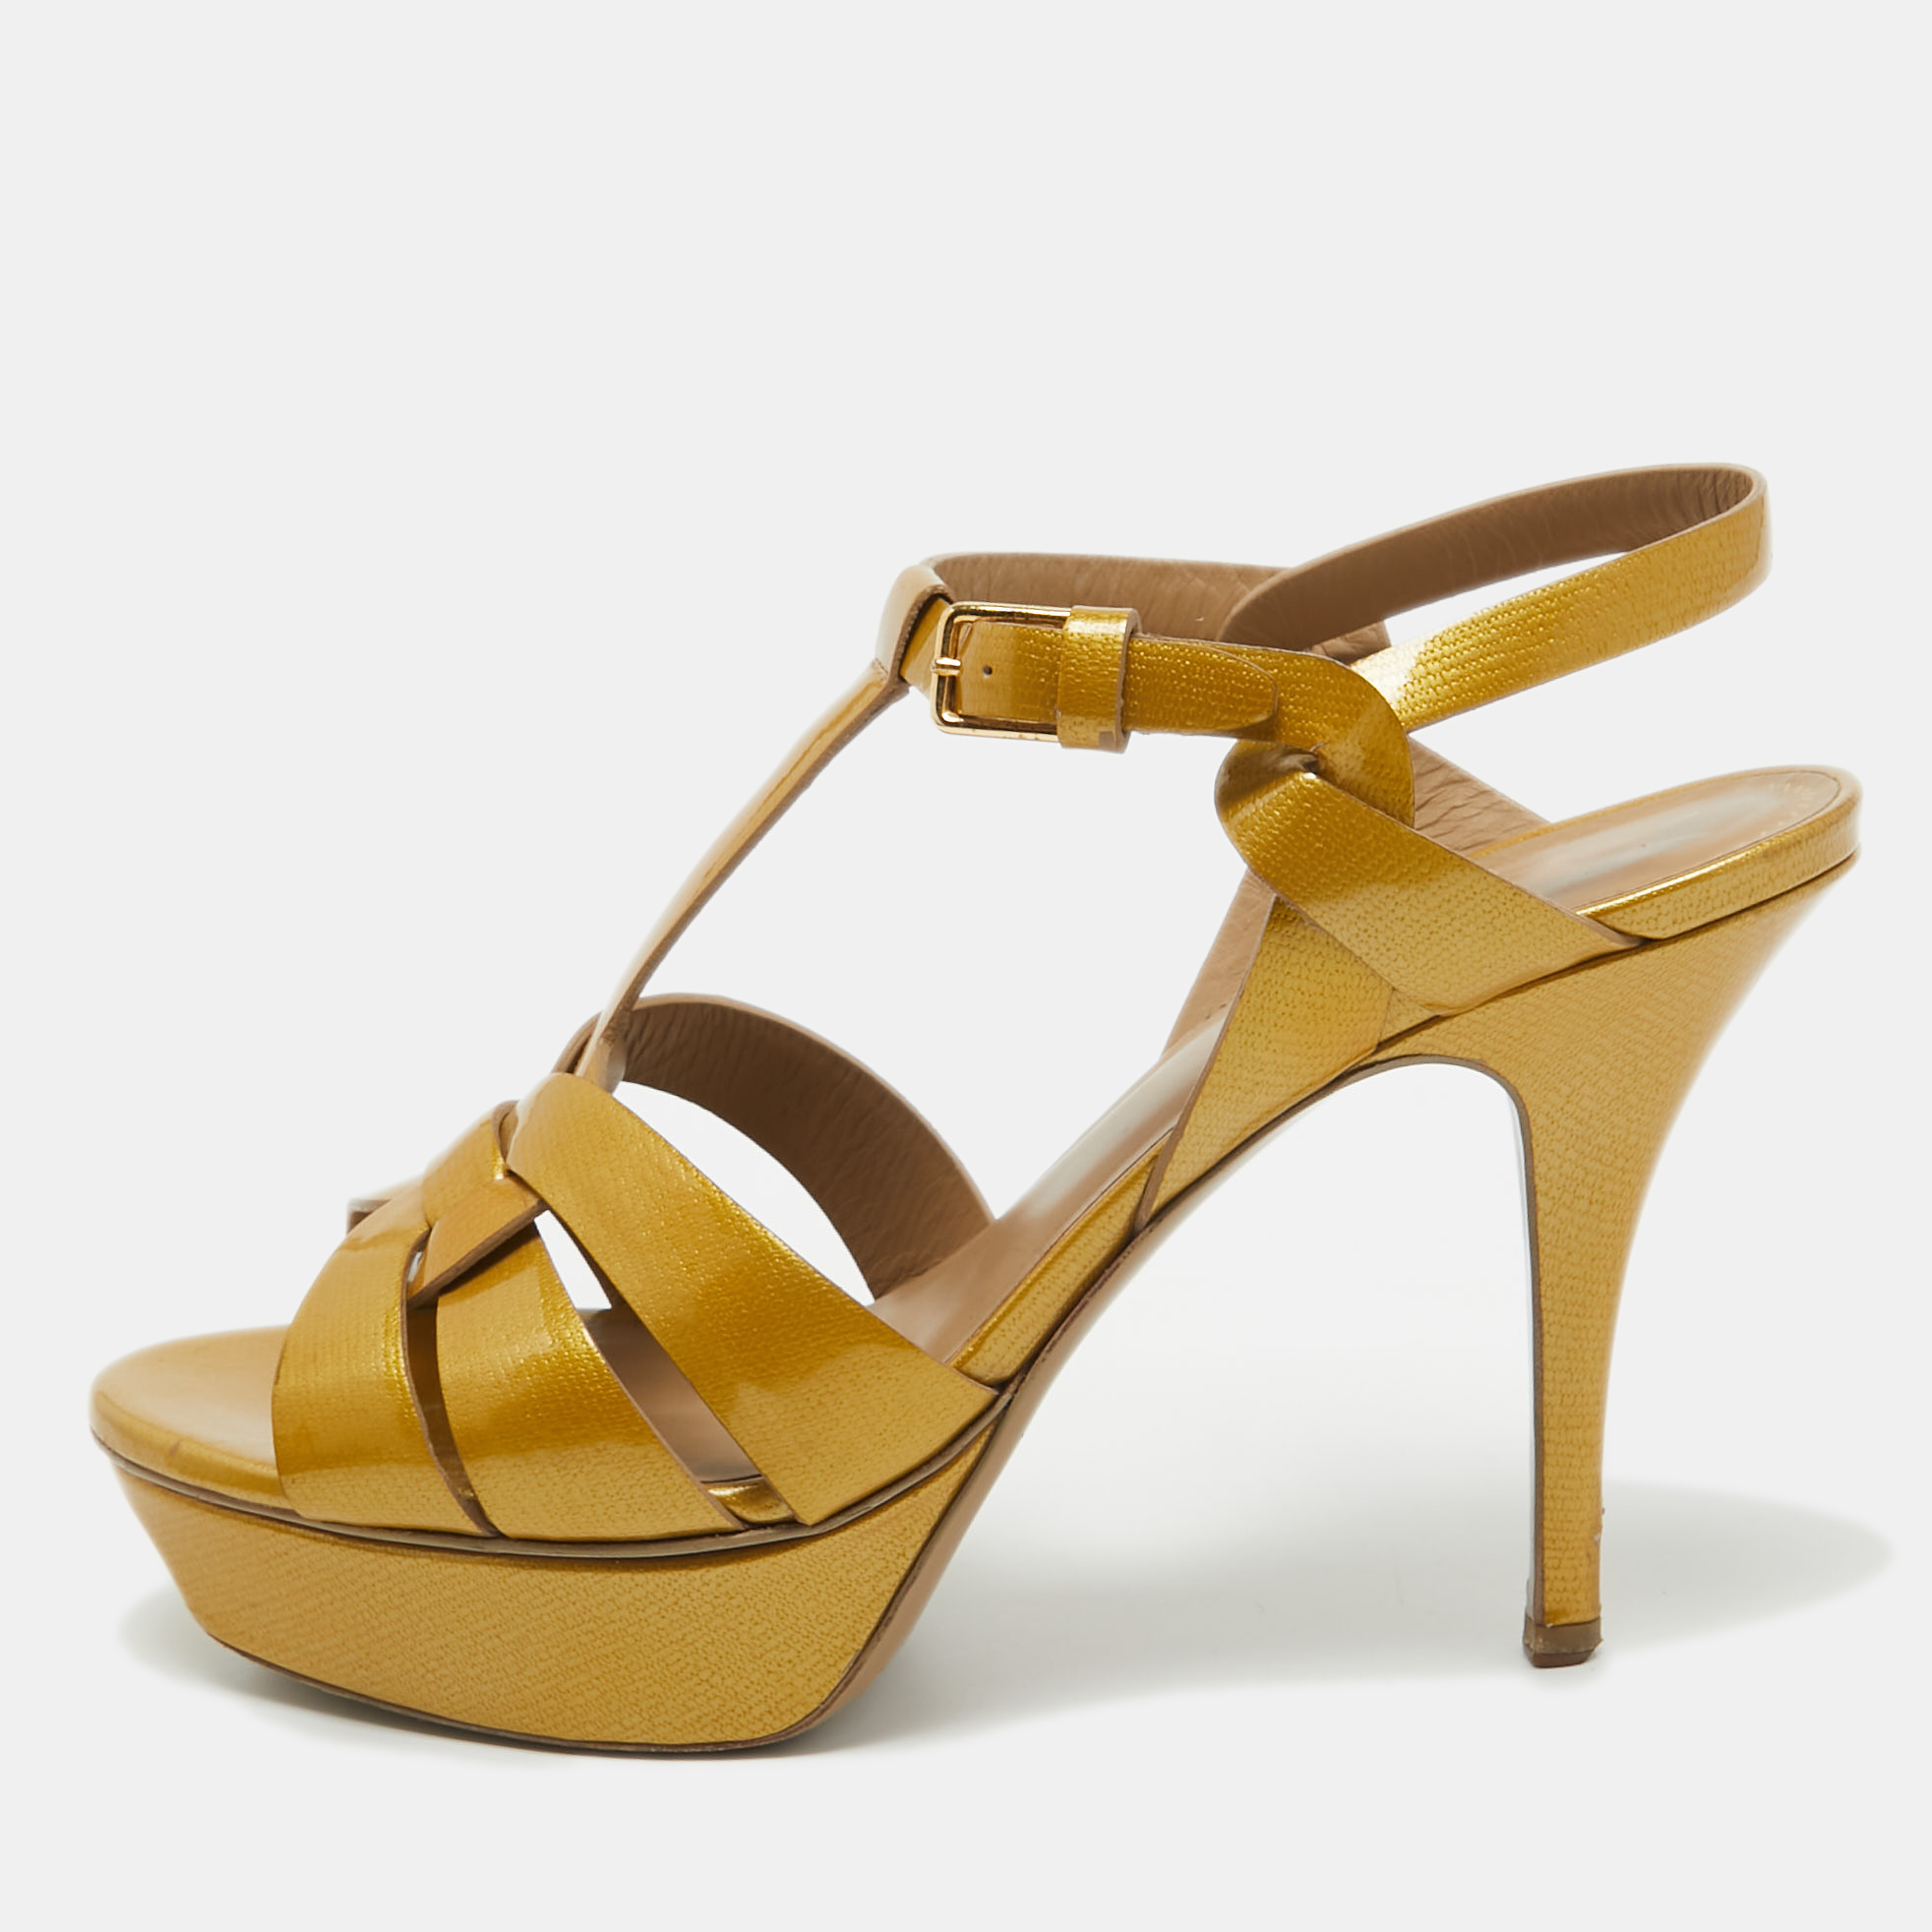 Yves saint laurent yellow patent leather tribute sandals size 38